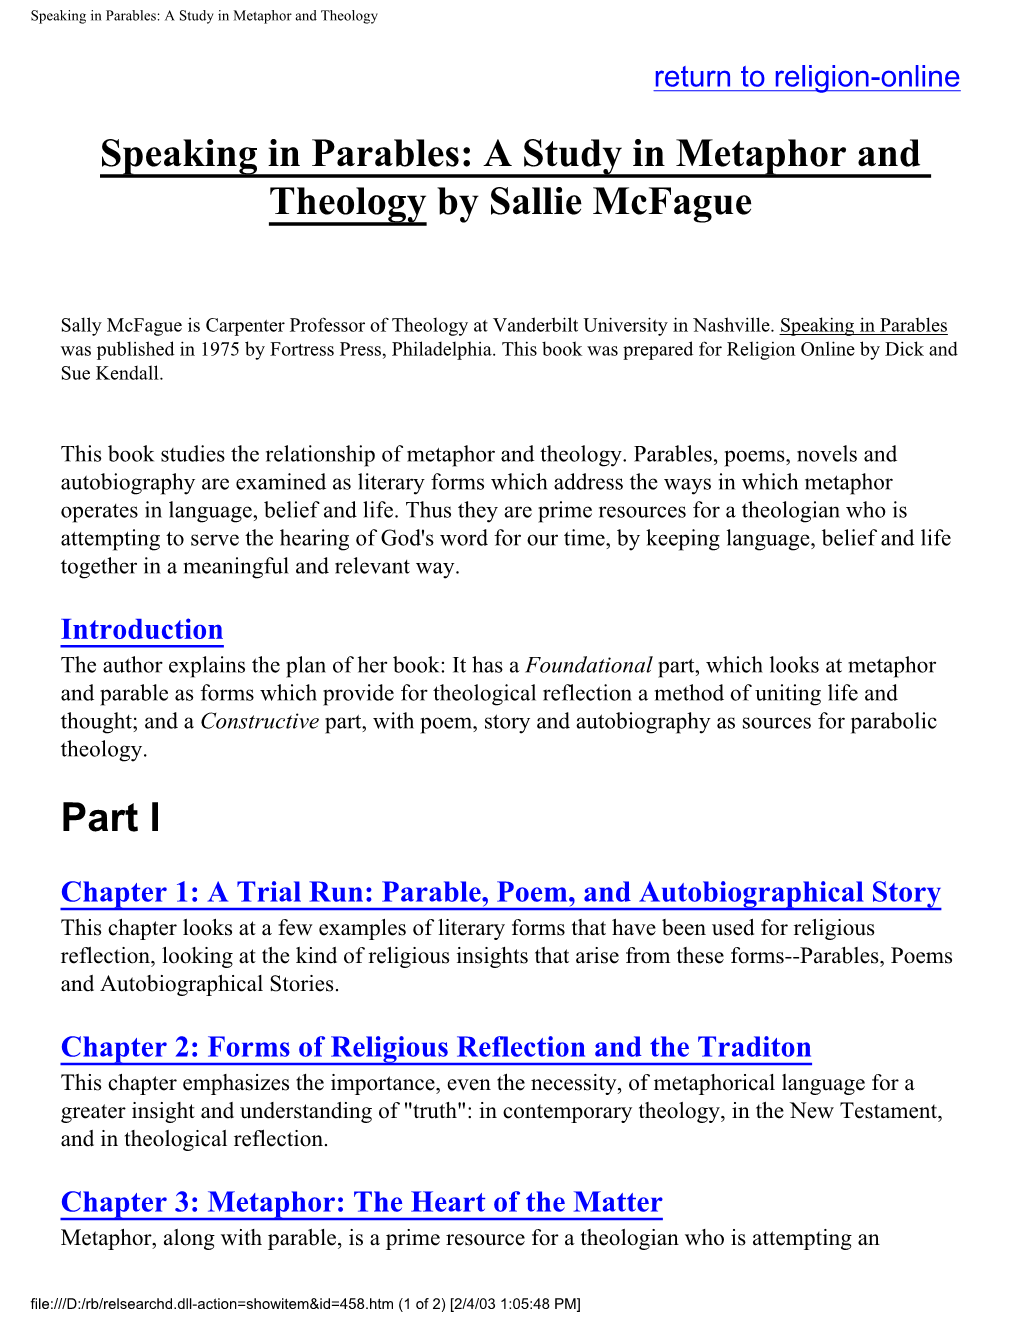 Speaking in Parables: a Study in Metaphor and Theology